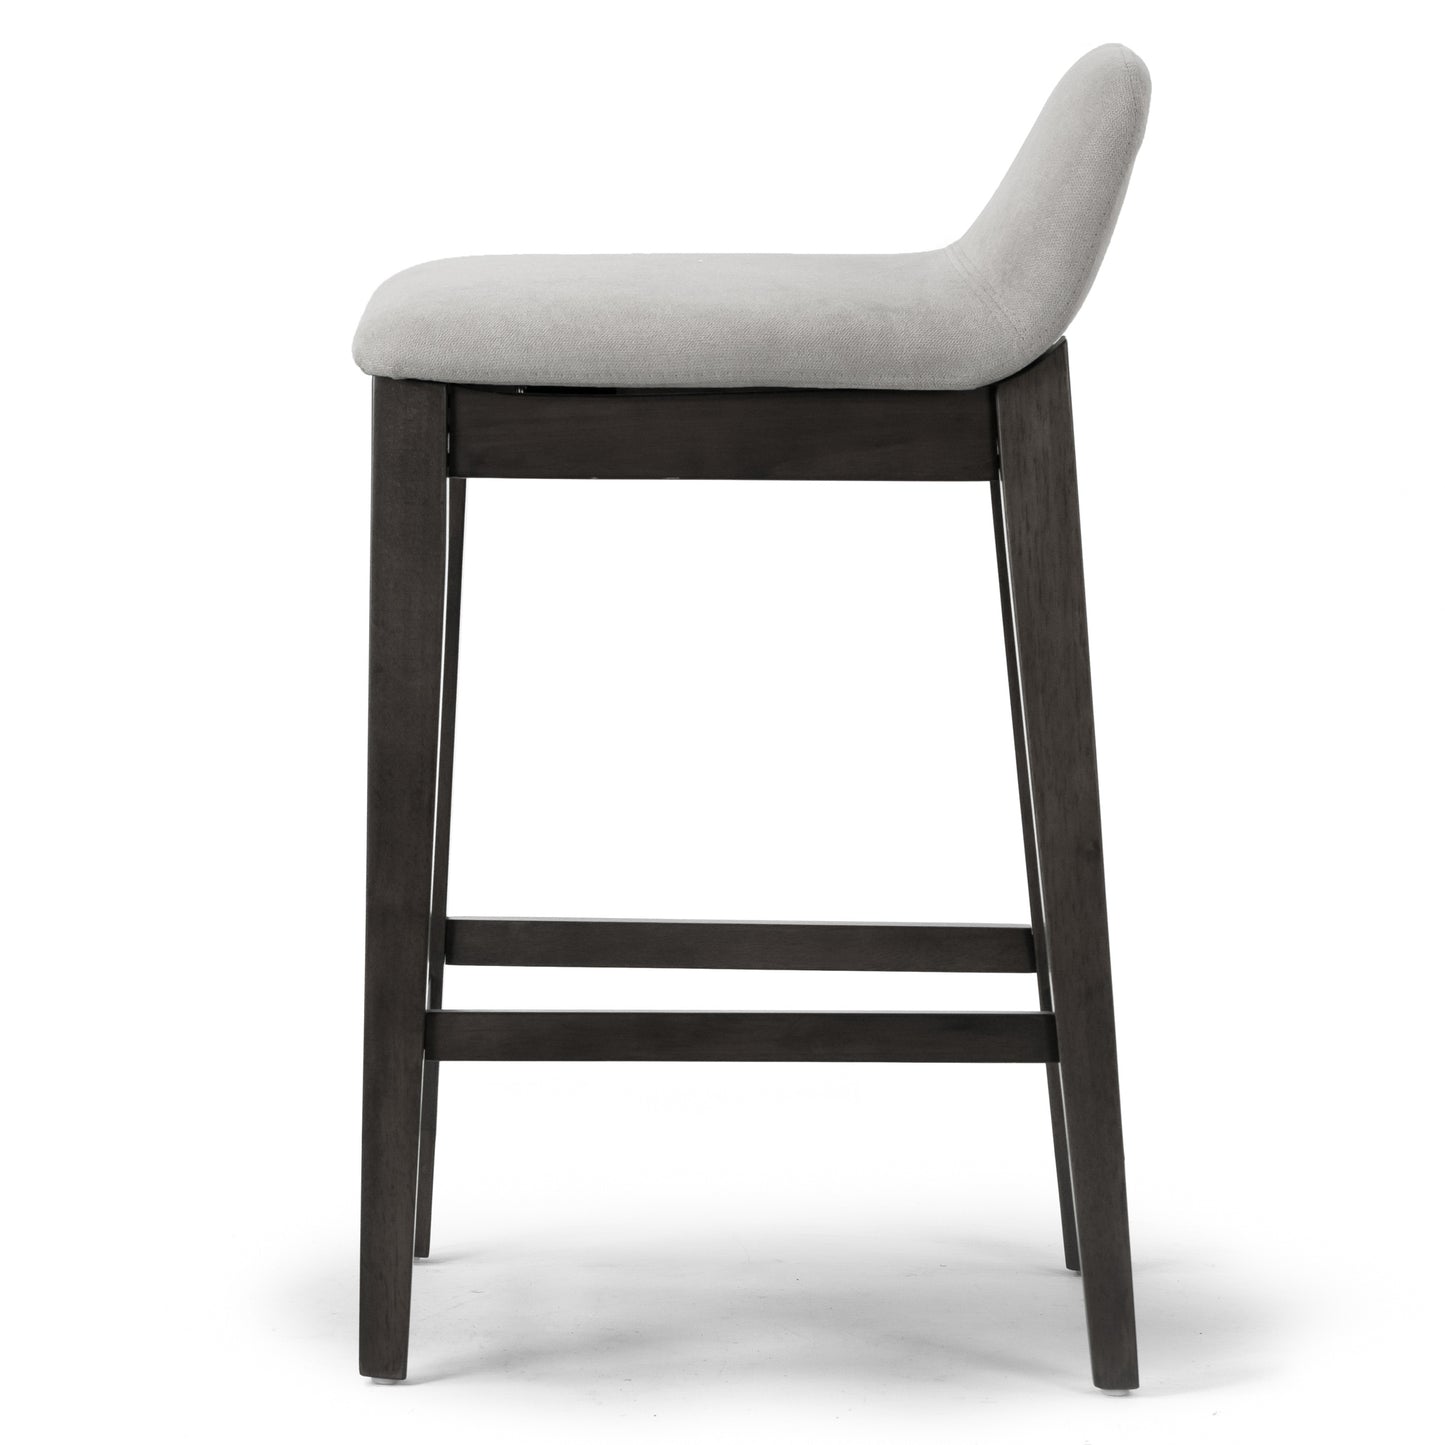 Set of 2 Atia Black Rubberwood Counter Stool with Low Back Fabric Seat